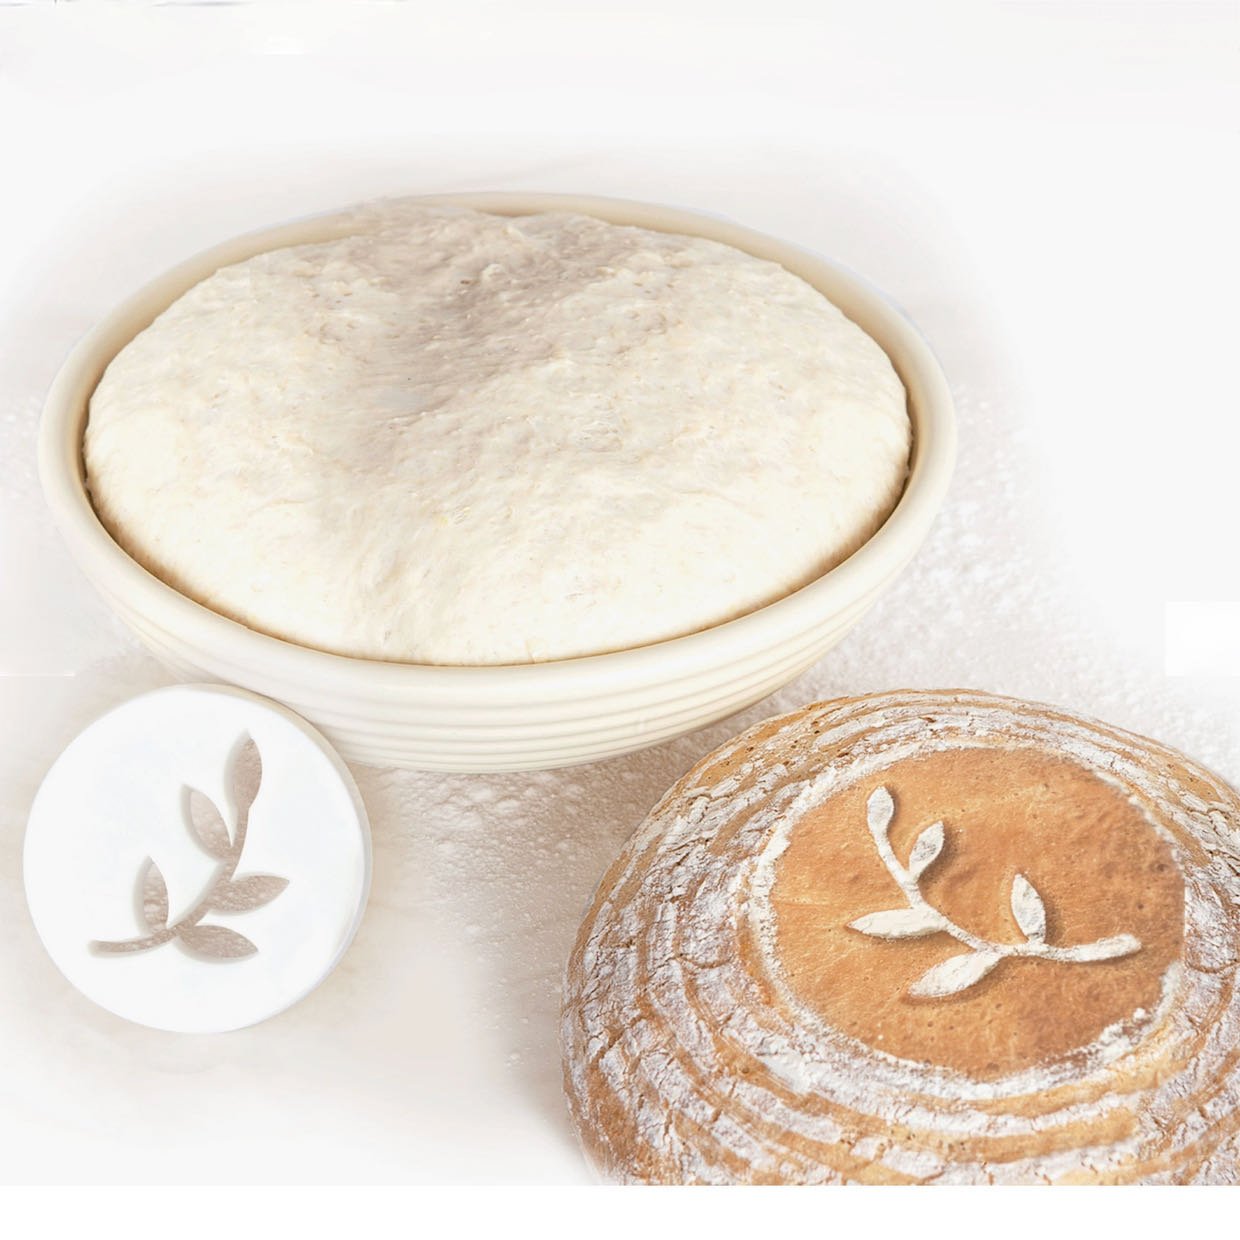 Set of Two Bread Embossing Disks - Marmalade Mercantile